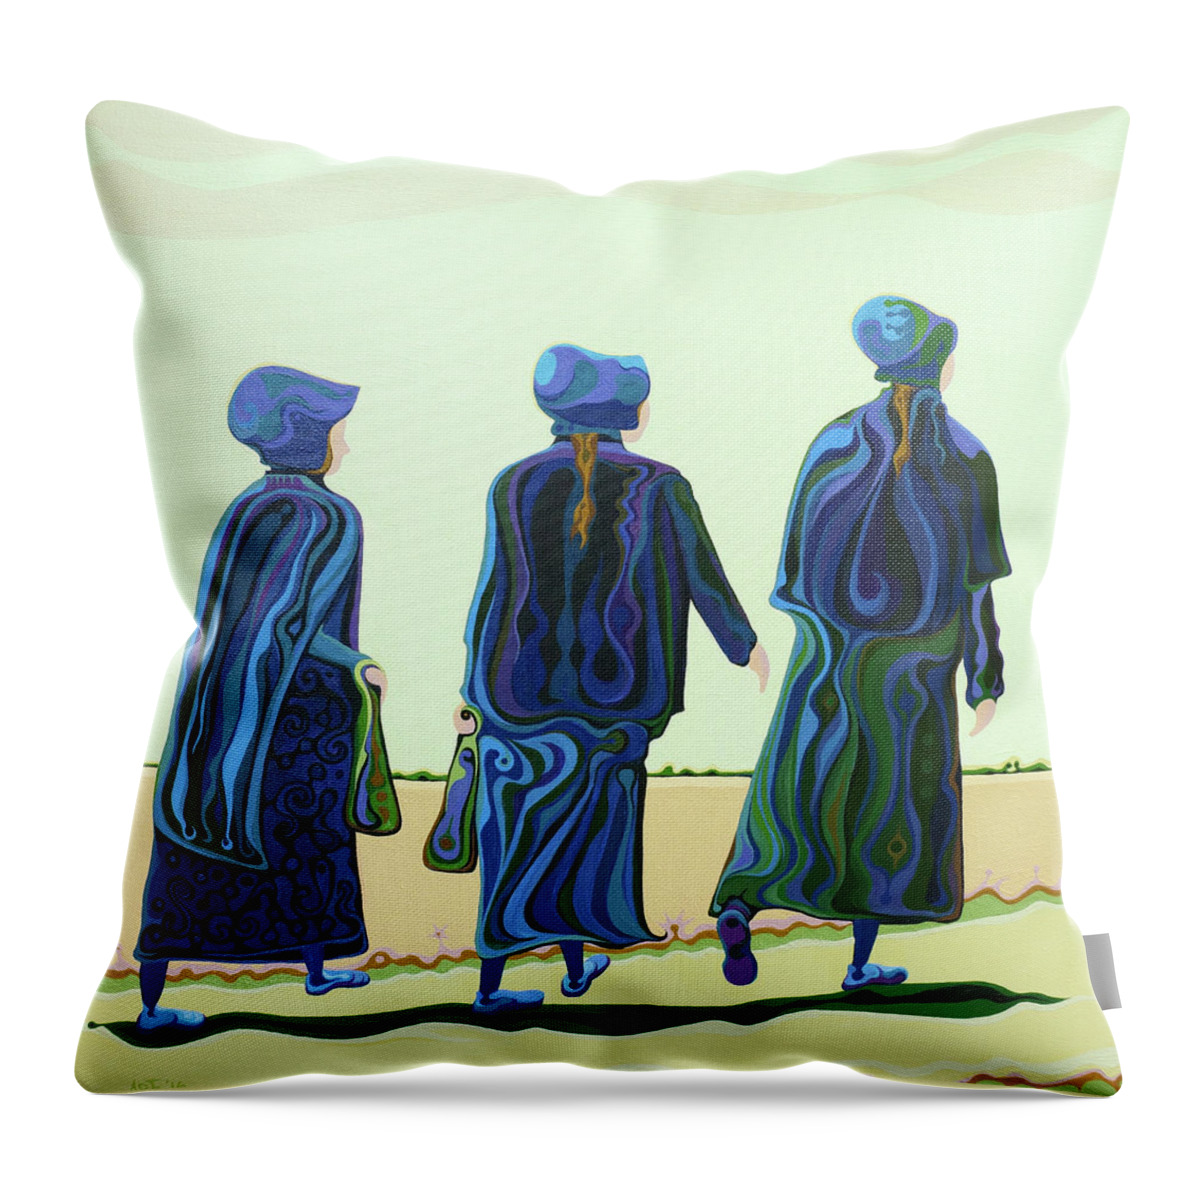 Landscape Throw Pillow featuring the painting Walking the Walk by Amy Ferrari